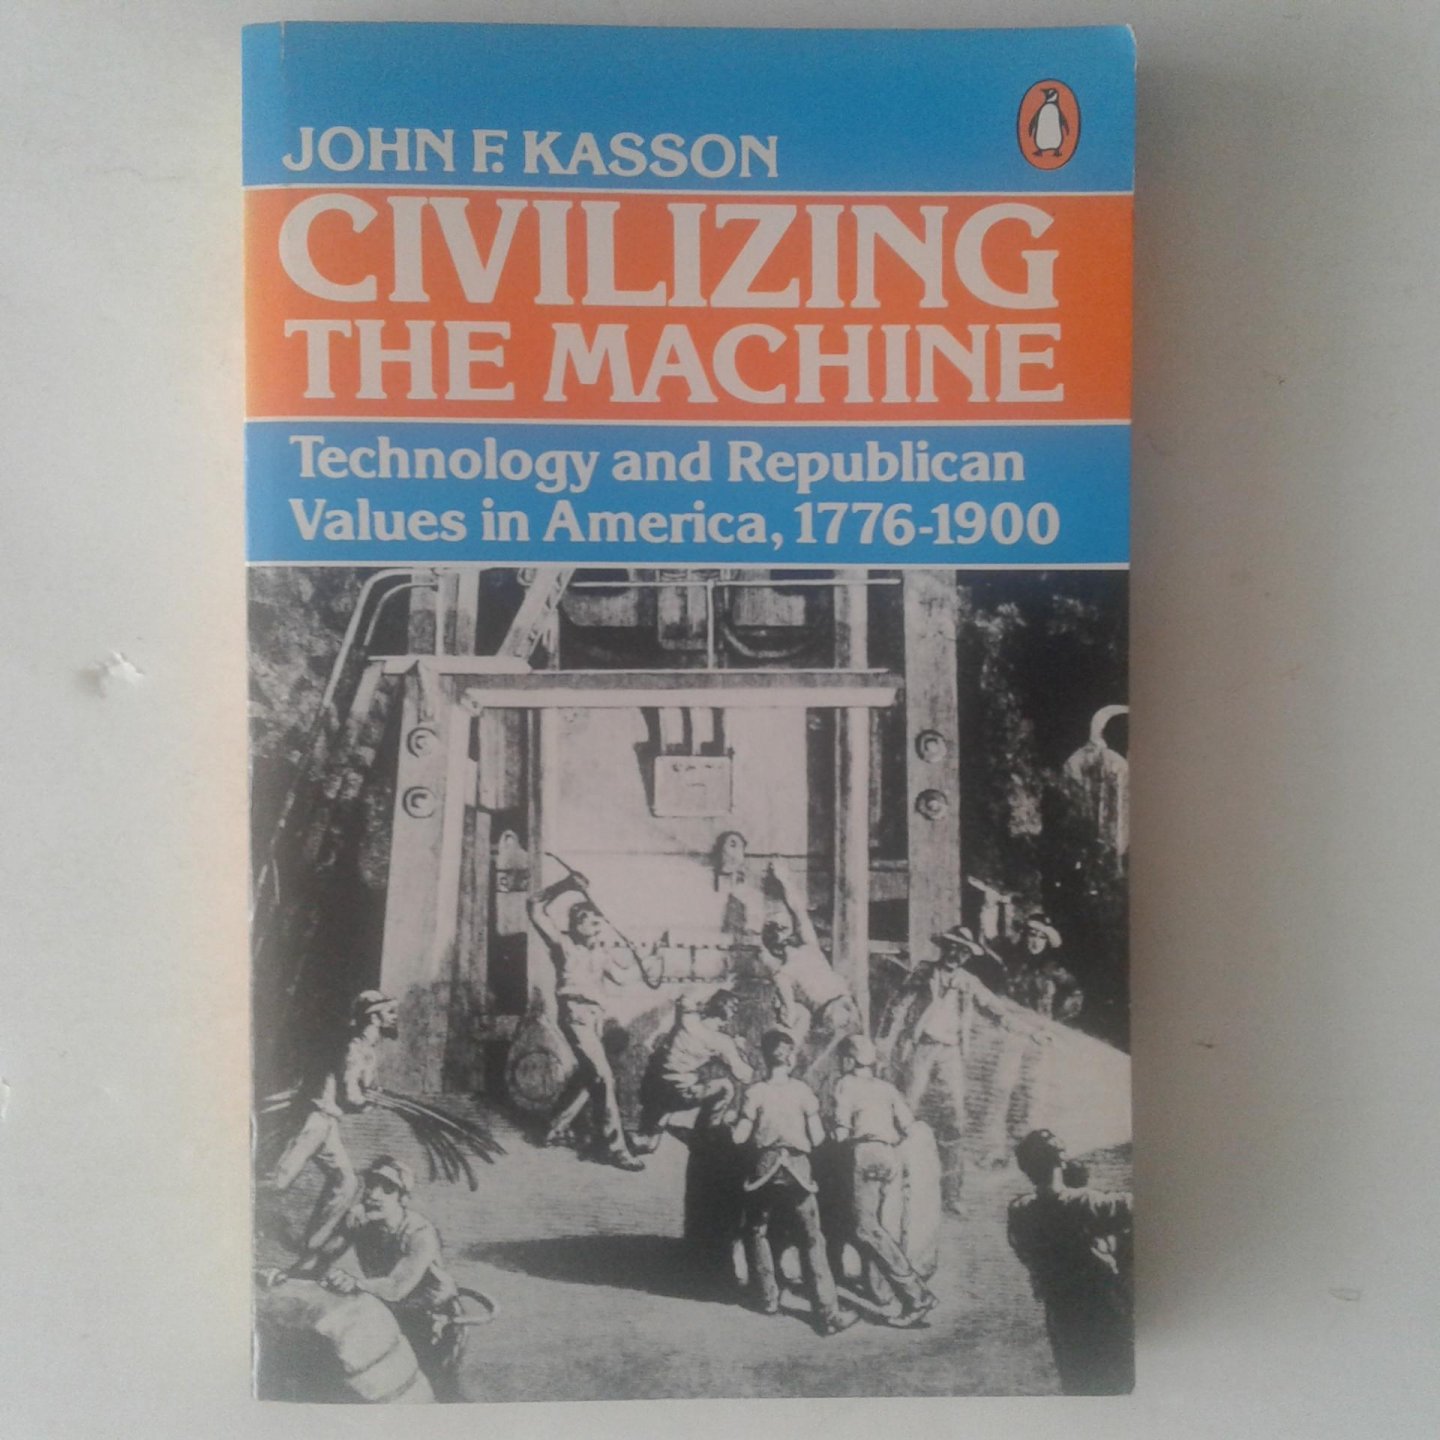 Kasson, John F. - Civilizing the Machine ; Technology and Republican Values in America, 1776-1900